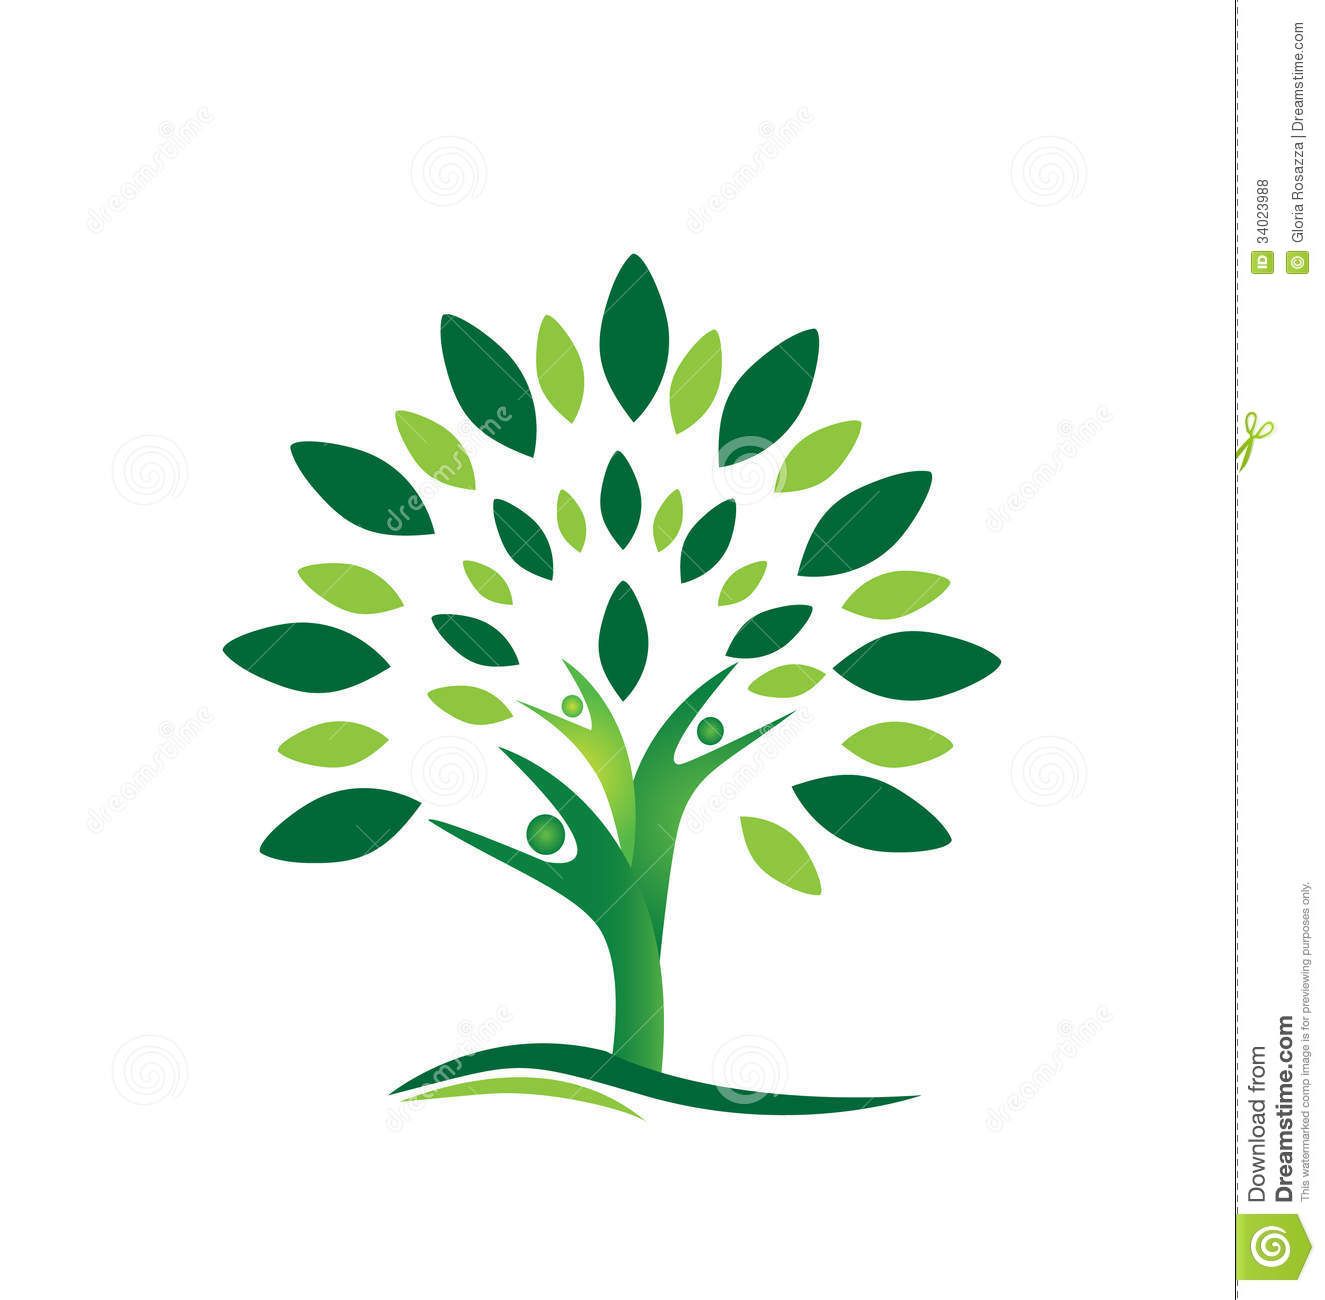 Image result for free tree logo clipart.